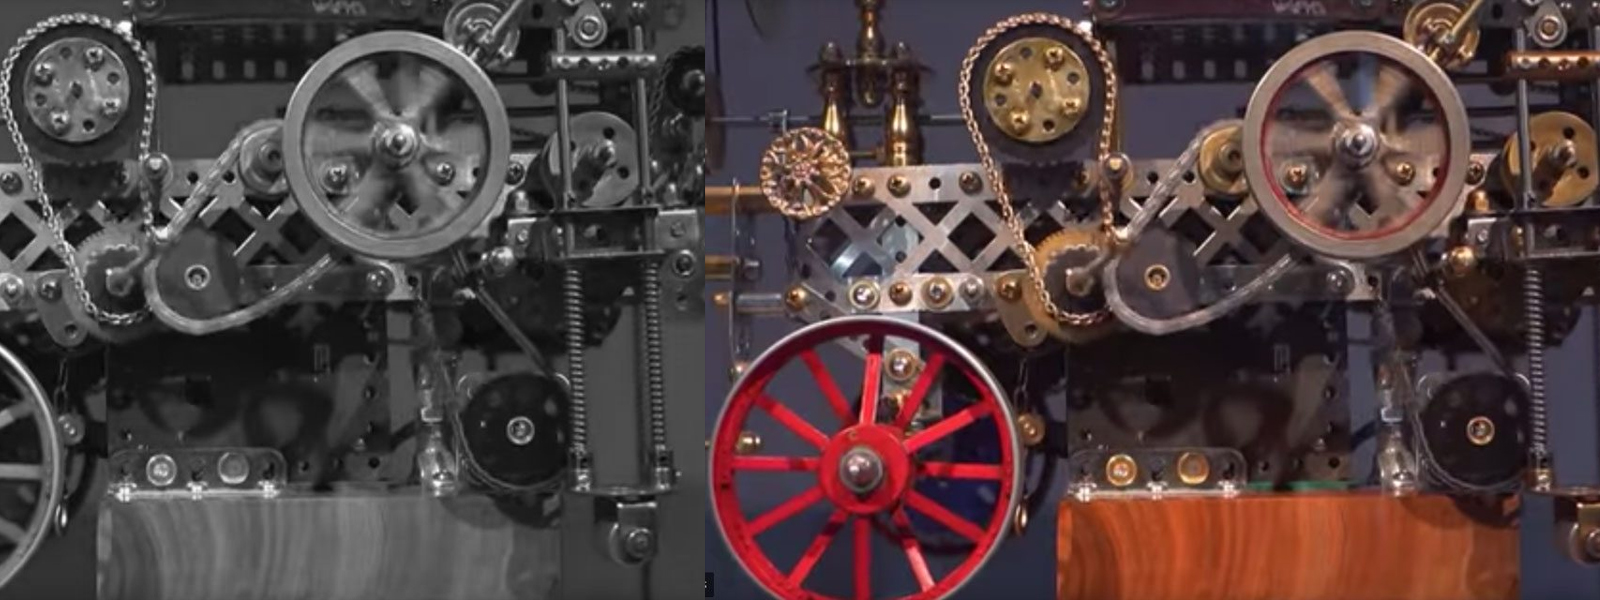 A Cache of Kinetic Art: Simply Steampunk